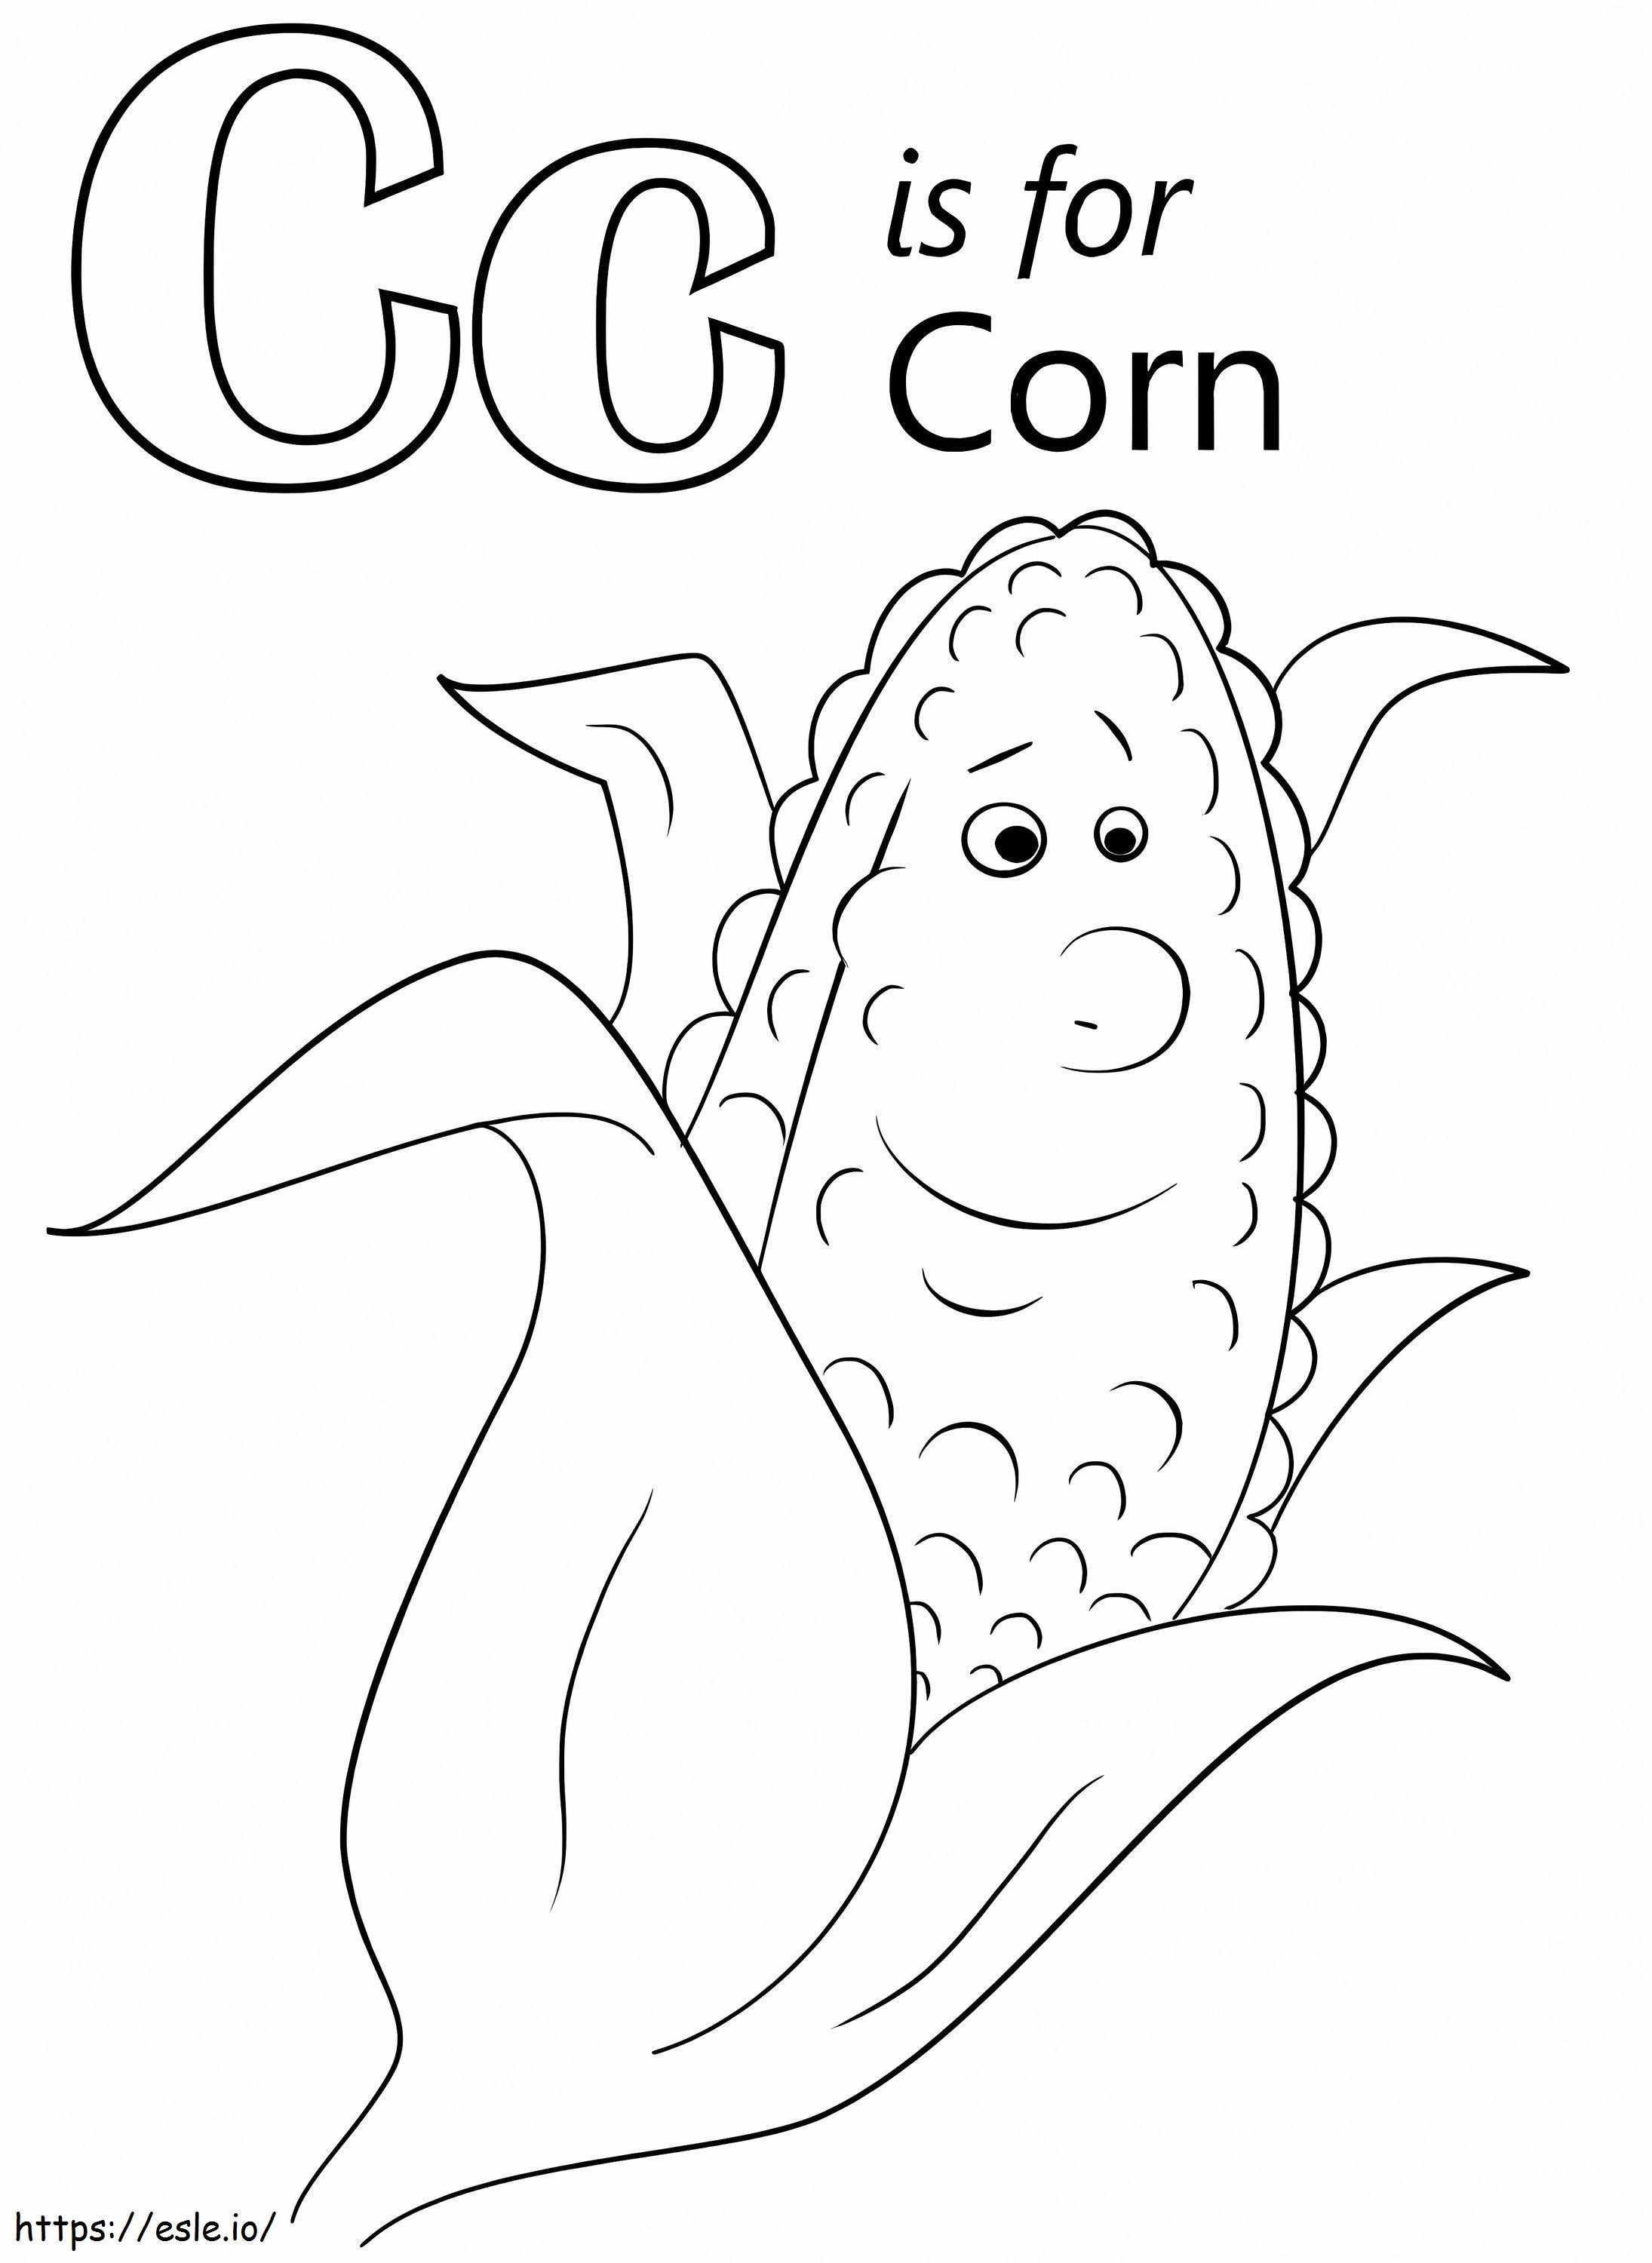 Frequent Letter C coloring page